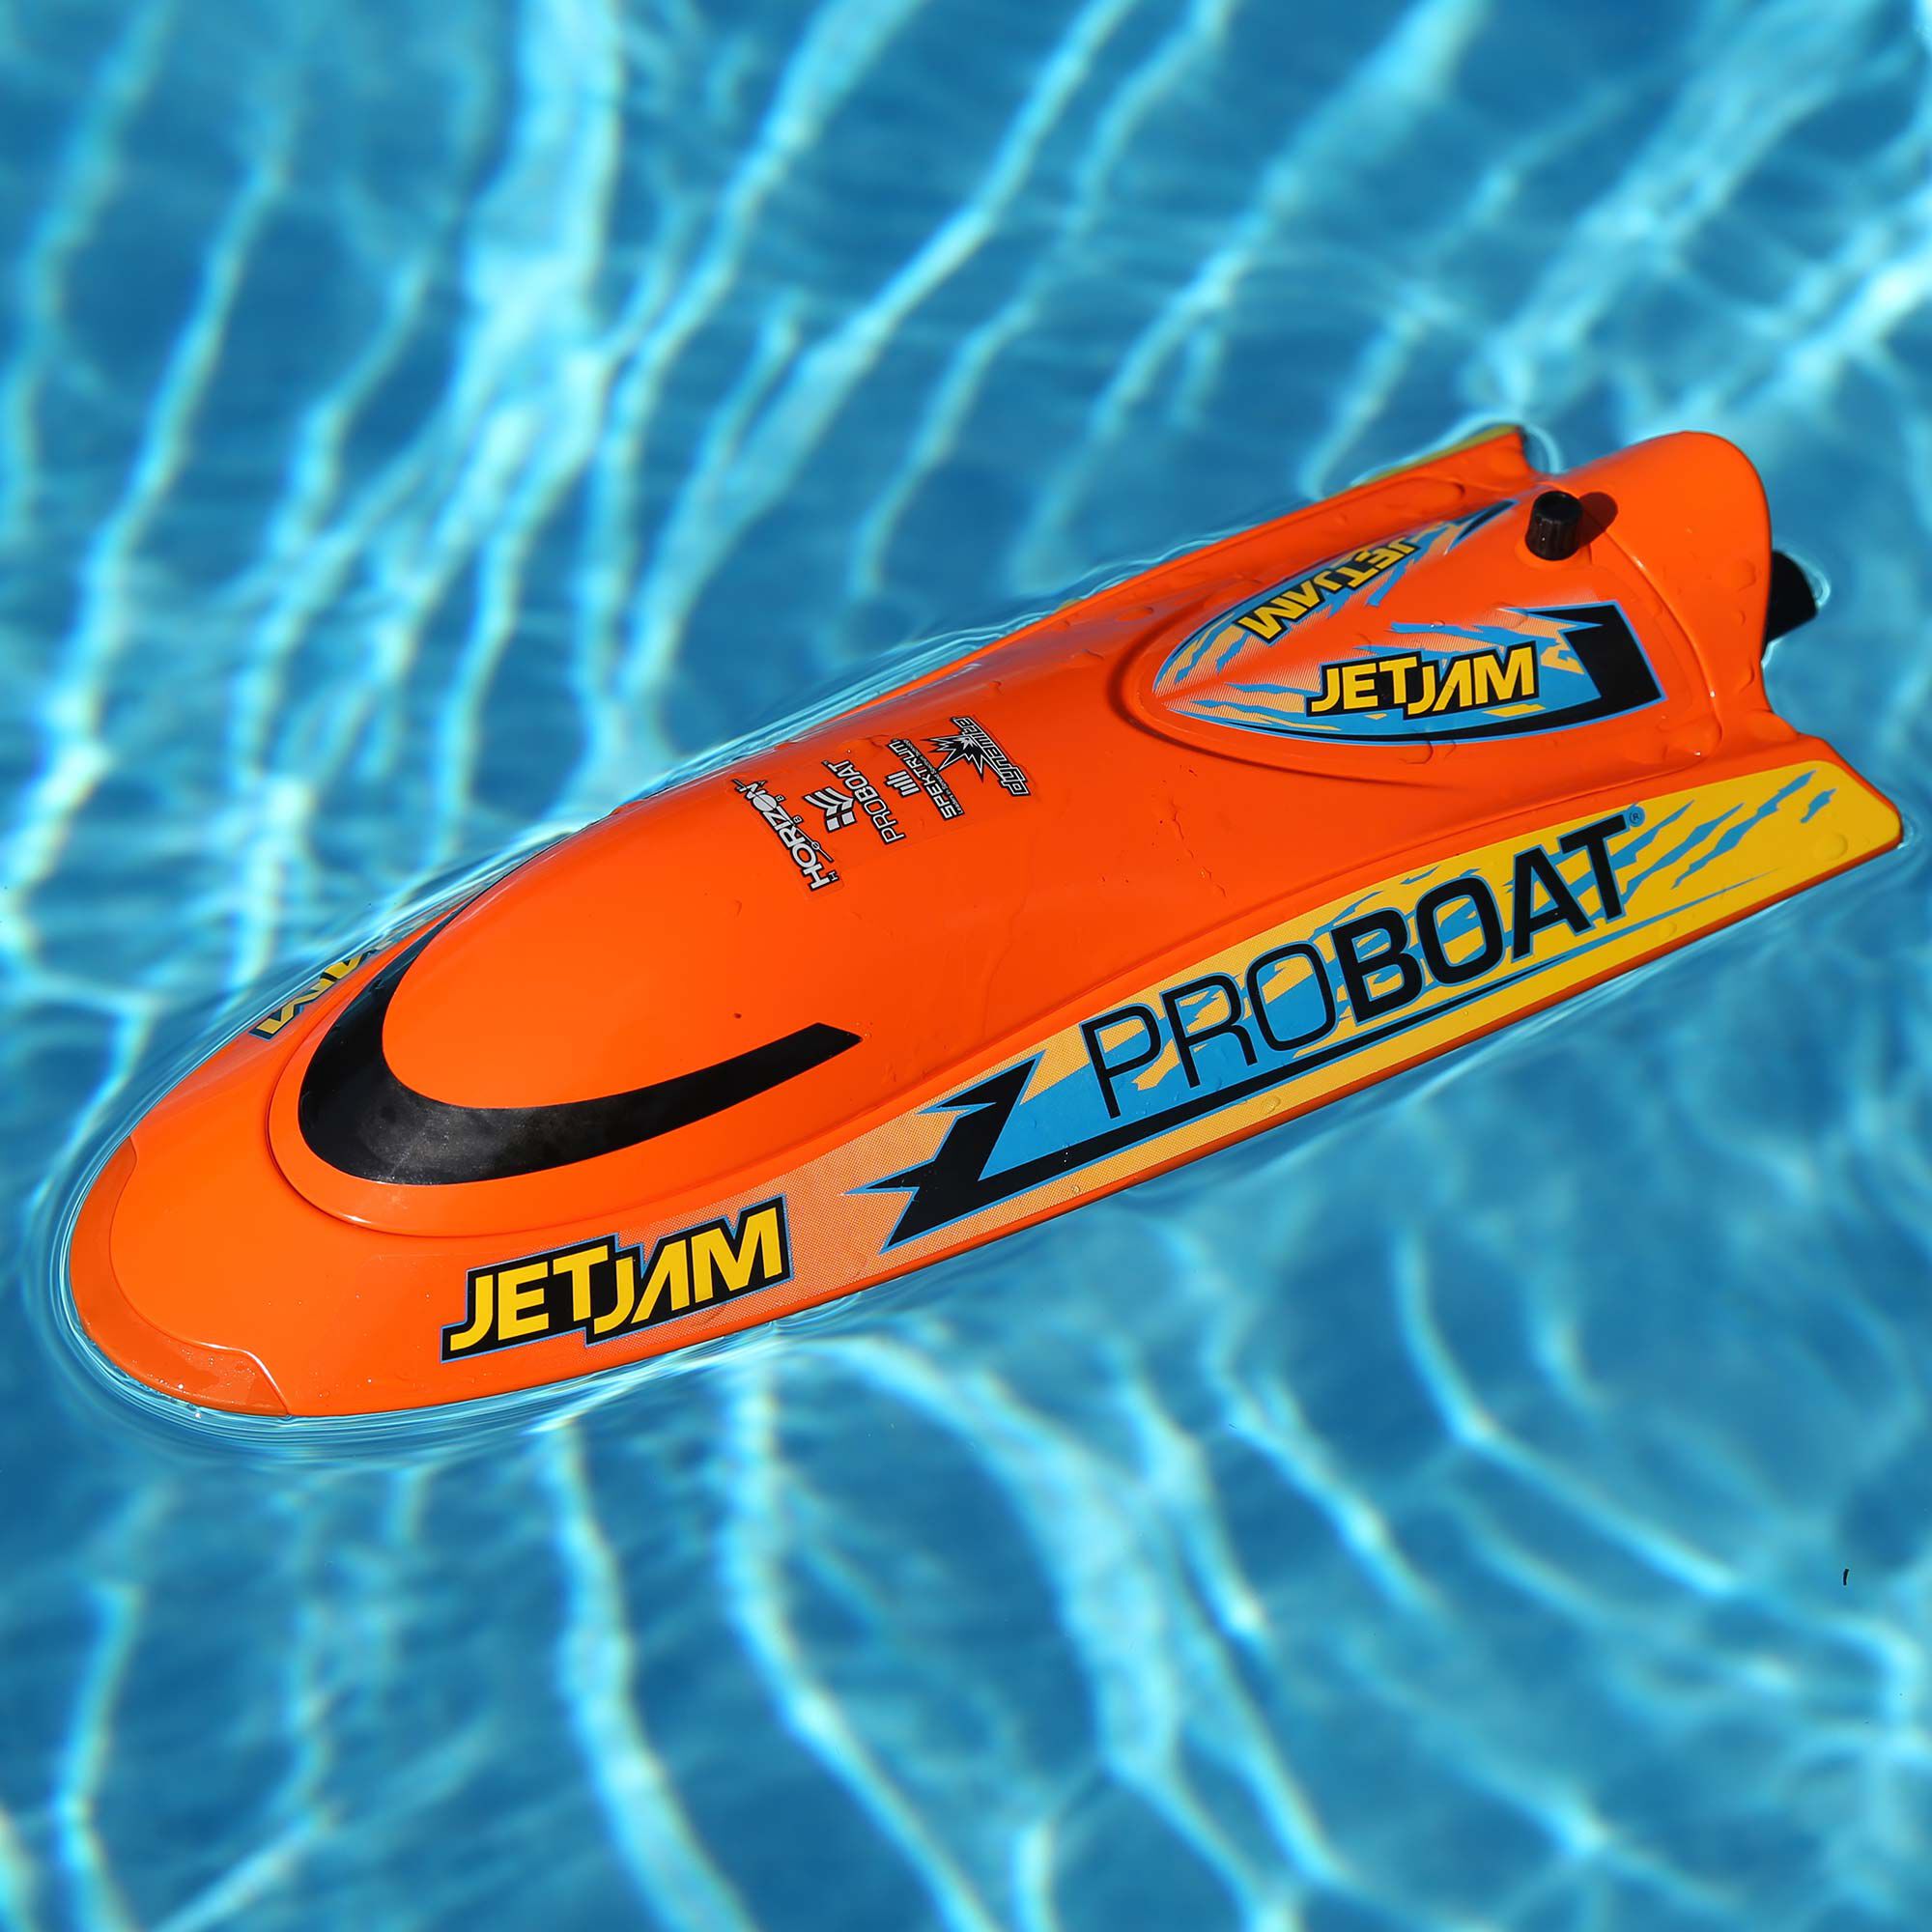 Pro Boat Jet Jam V2 12" Self-Righting Pool Racer Brushed RTR (Varios colores)